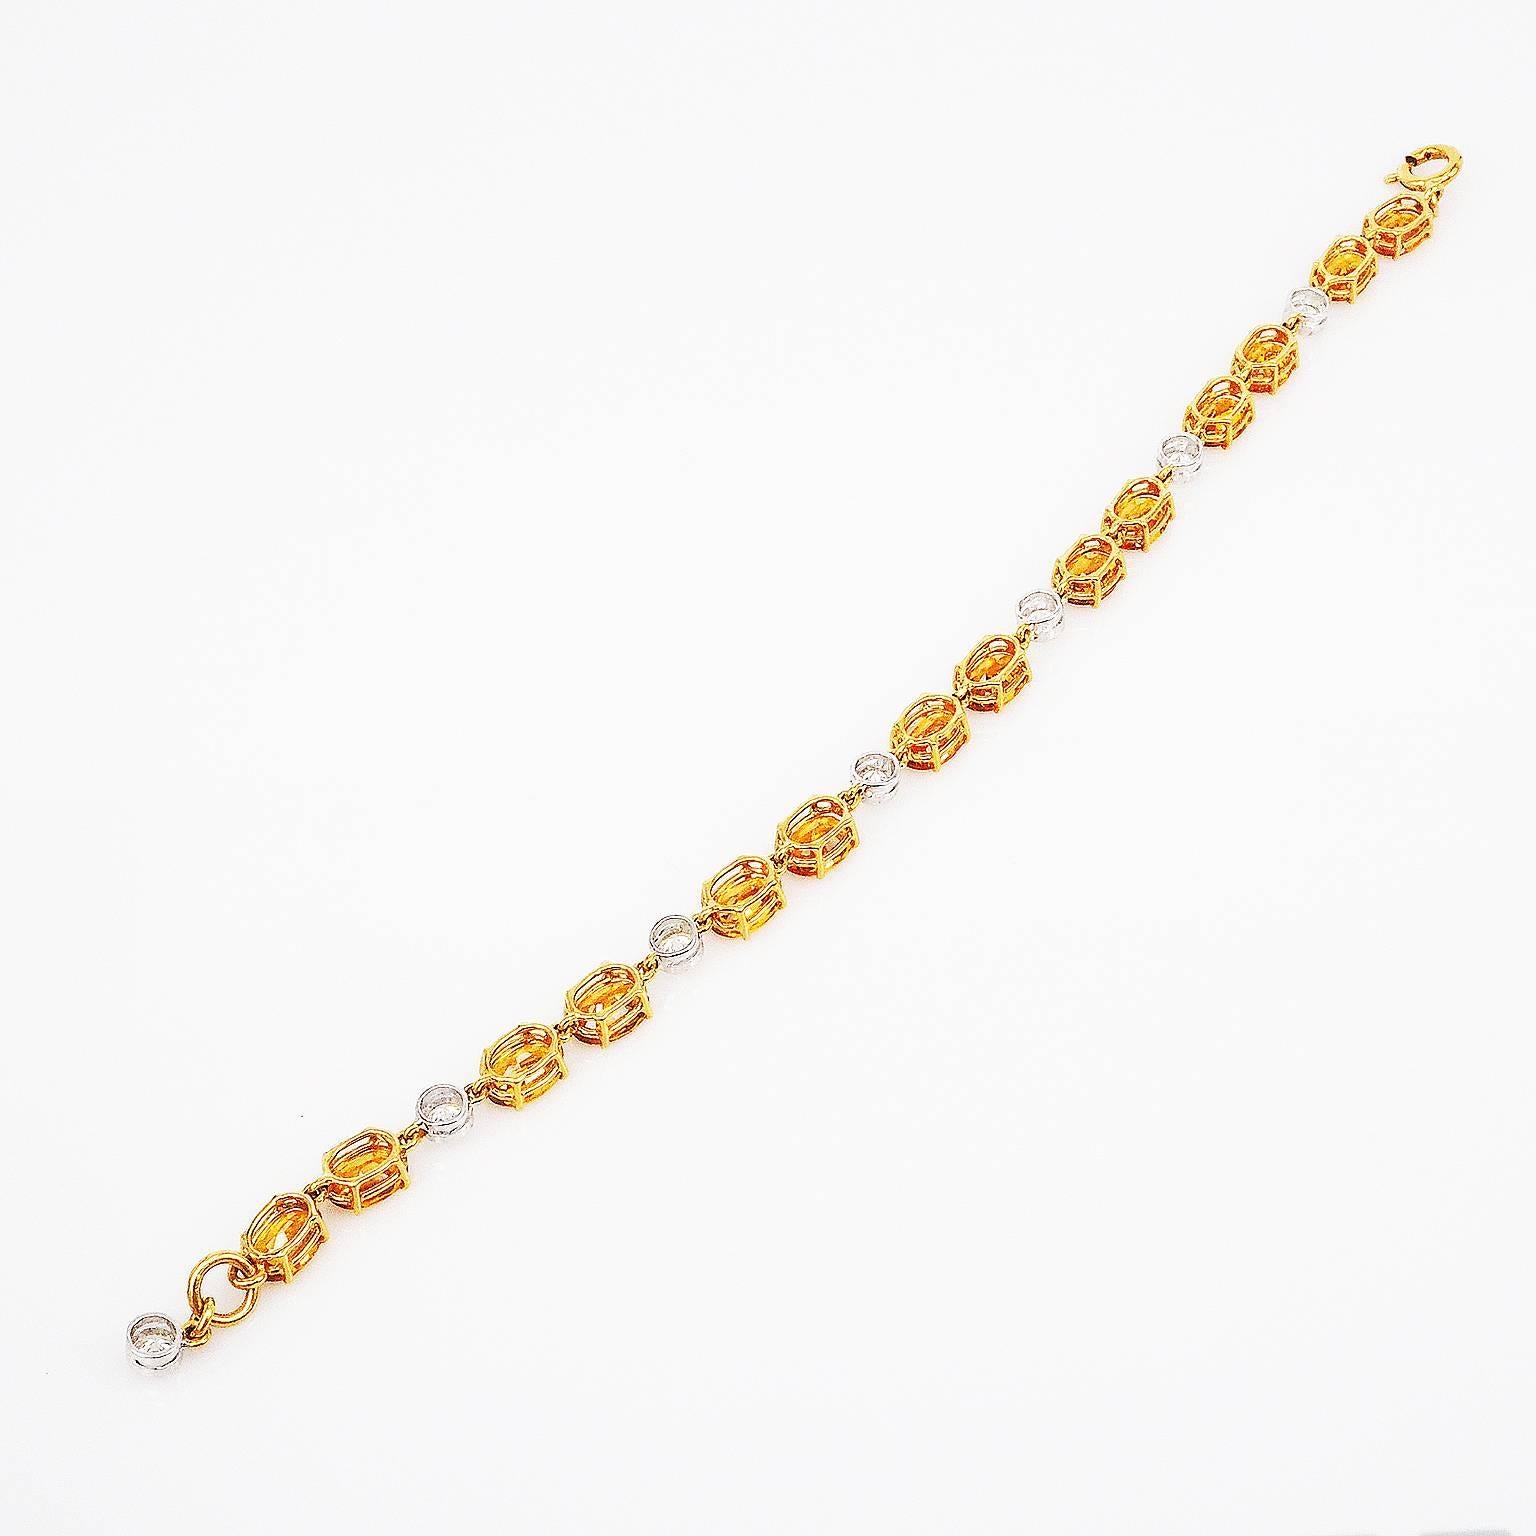 A very nice simply elegant bracelet which compose with the high quality of the yellow sapphire 12.26 ct,Diamond 1.32 ct H VS quality.